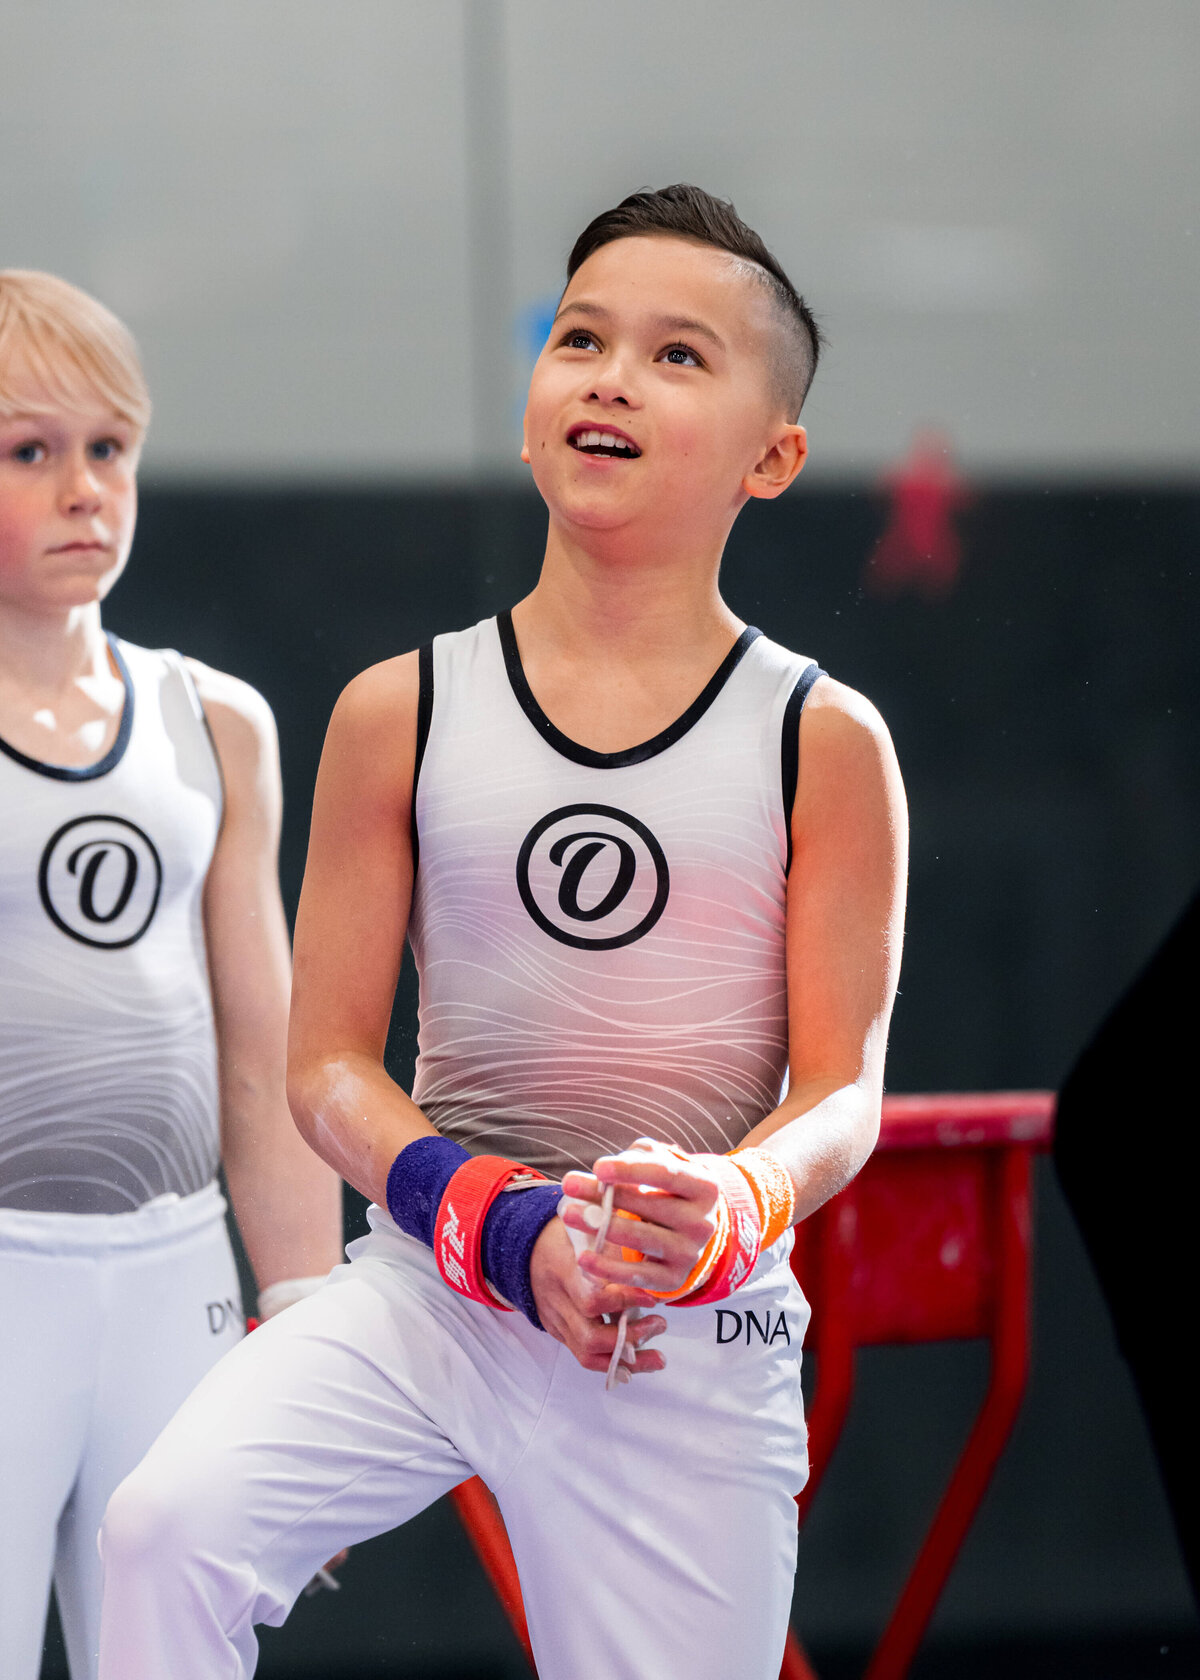 Photo by Luke O'Geil taken at the 2023 inaugural Grizzly Classic men's artistic gymnastics competitionA1_08633